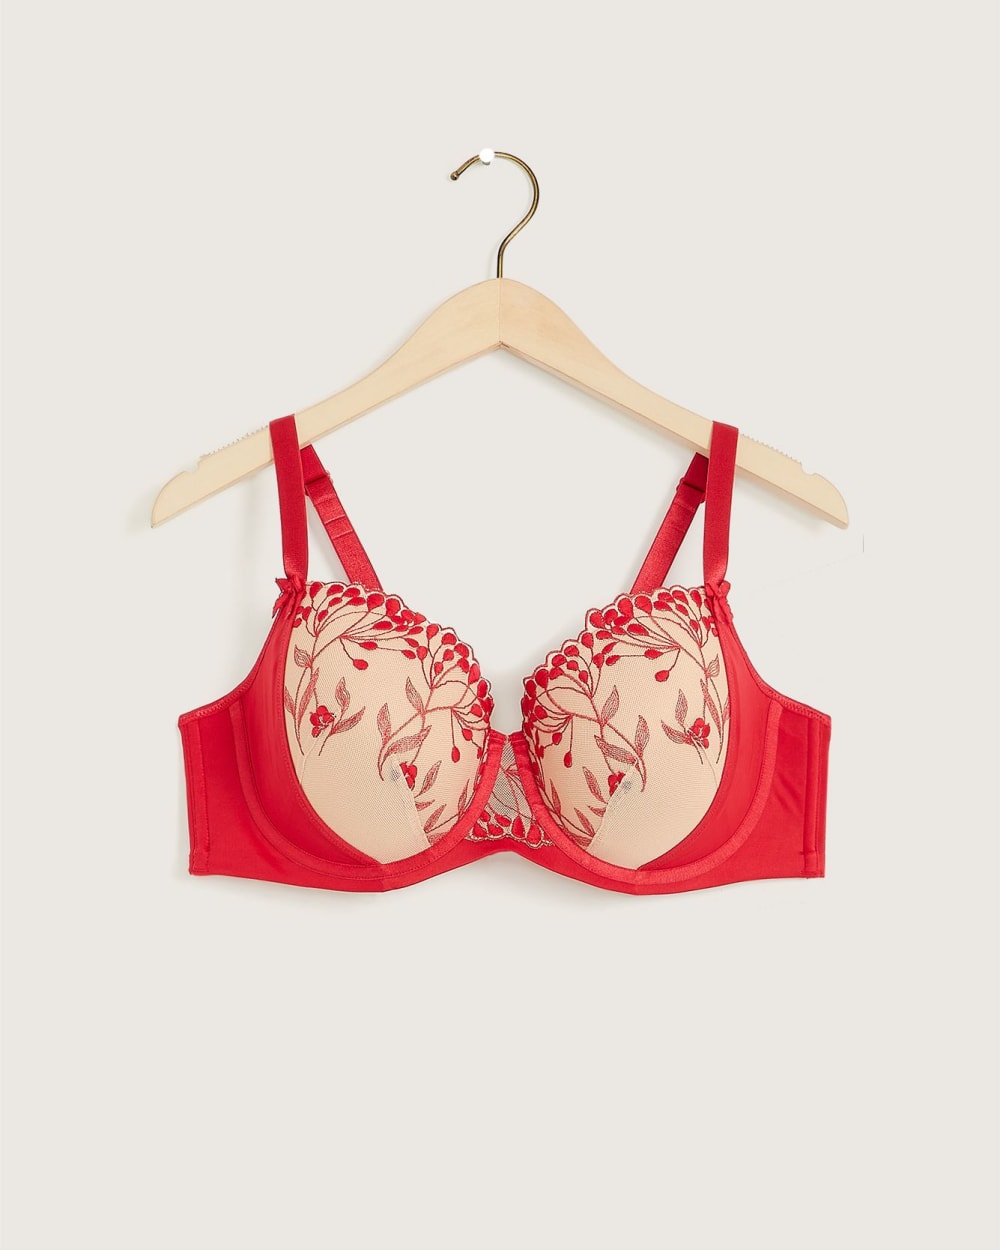 New Arrival Mesh Bras For Women Lace Bralette Embroidery Underwire